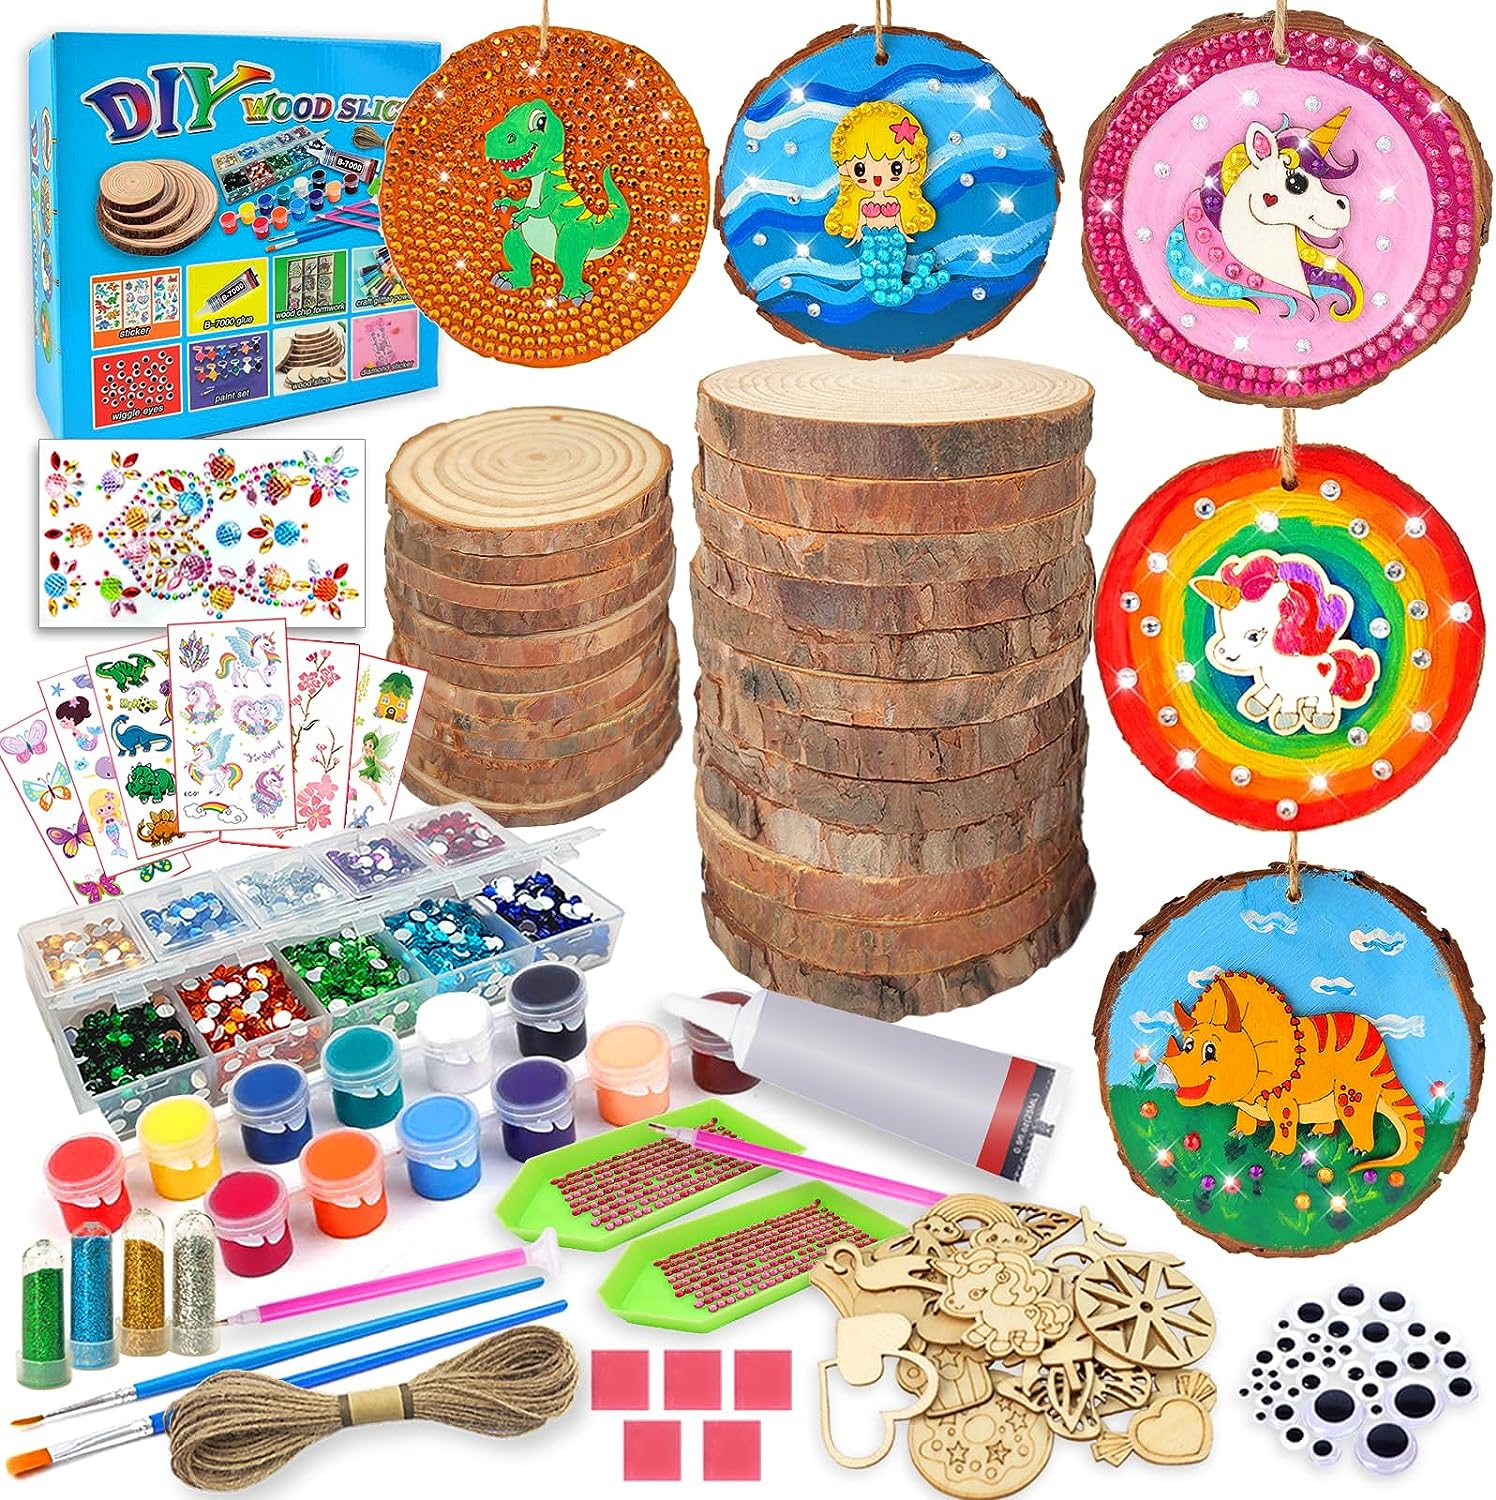 Yofun Paint Your Own Wooden Magnet - Wood Painting Craft Kit And